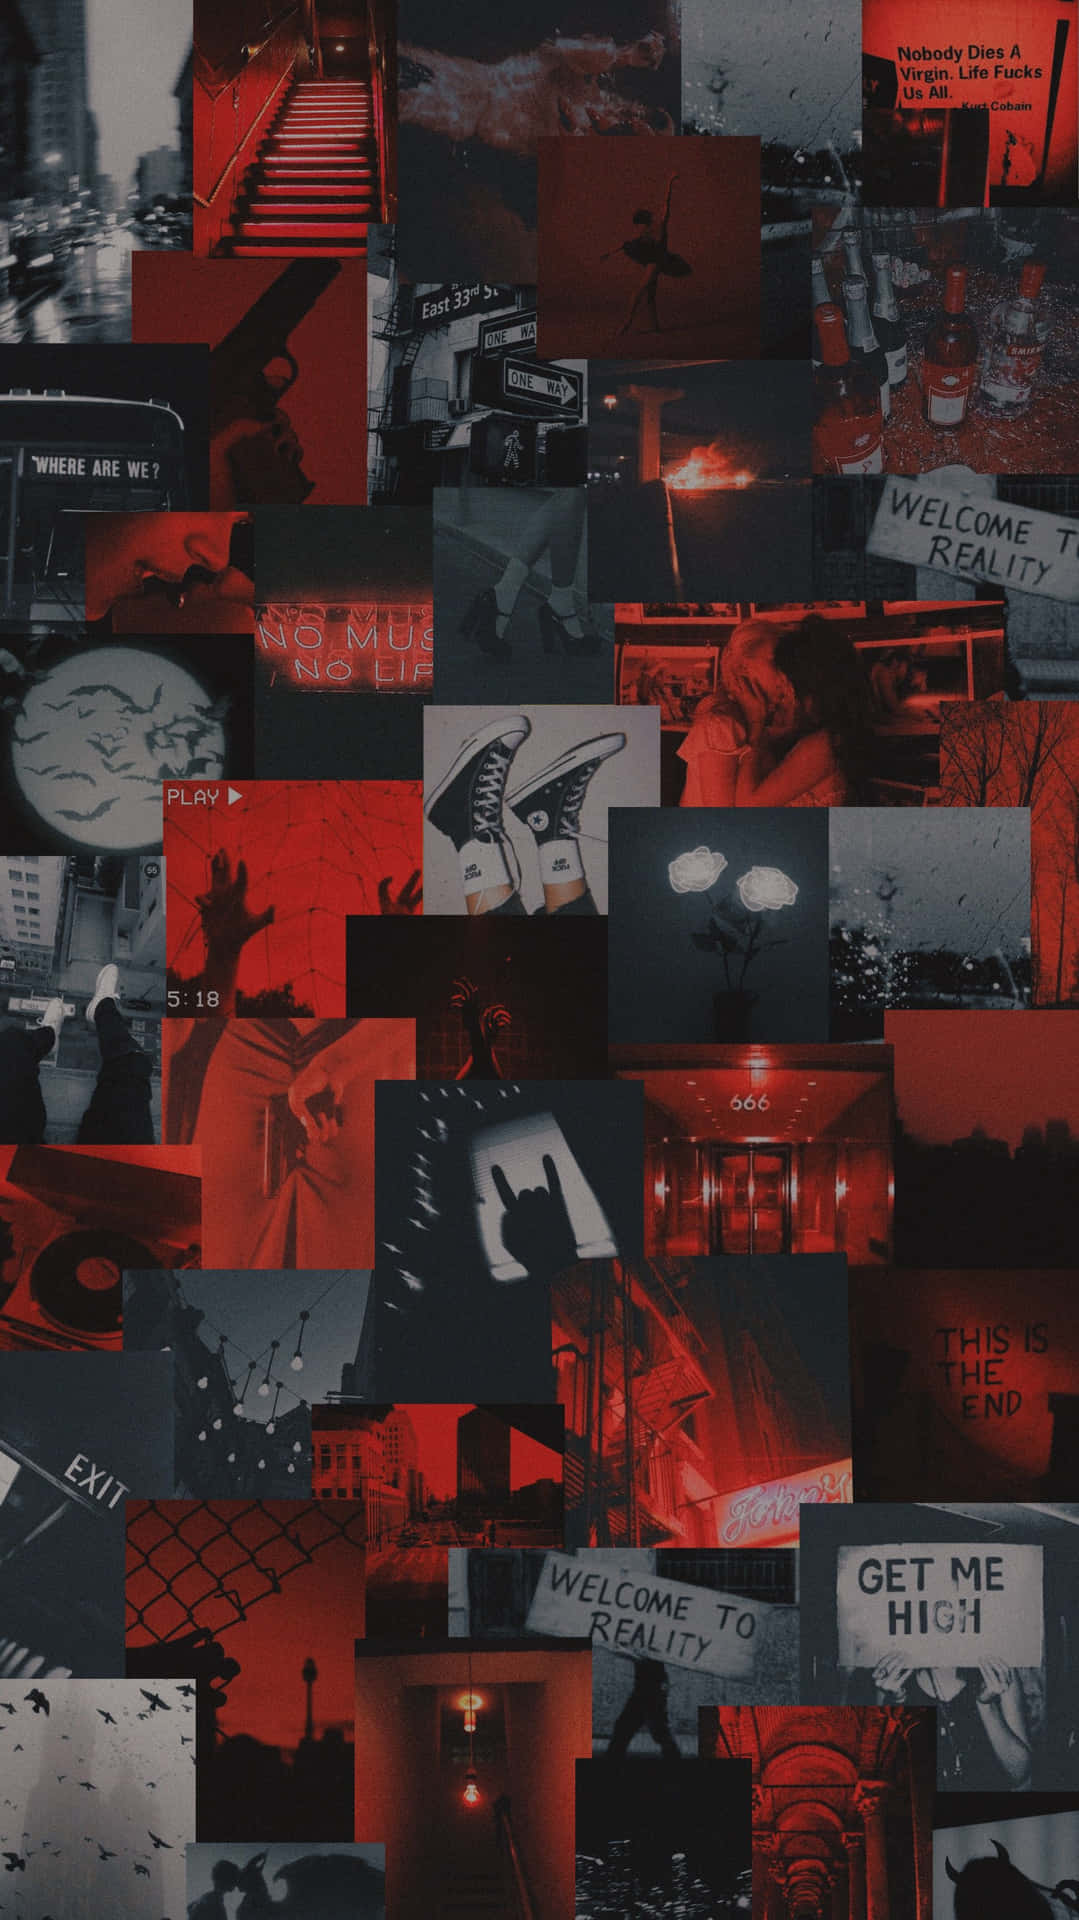 A Collage Of Photos With Red And Black Wallpaper